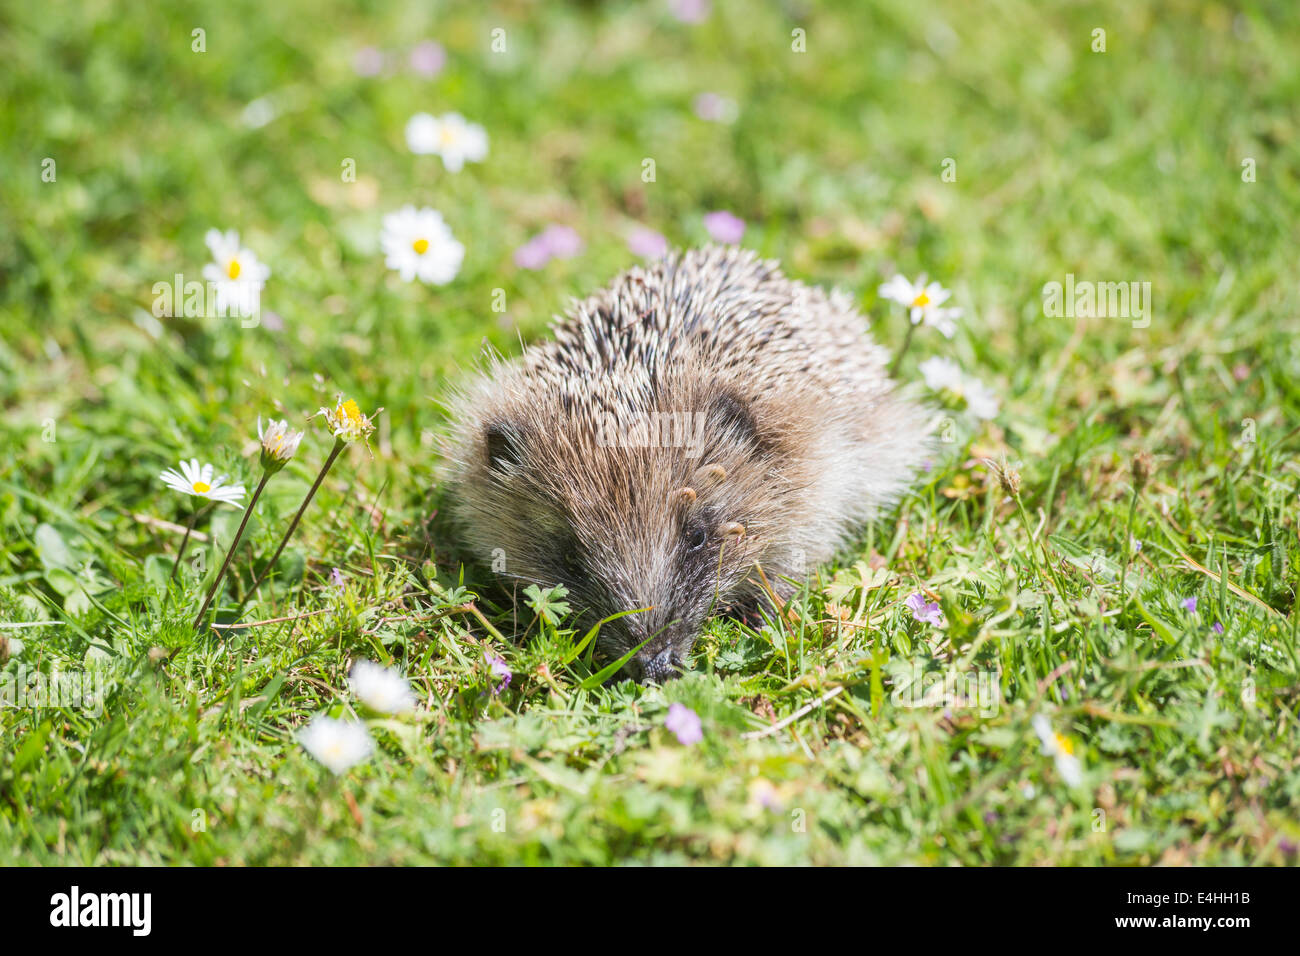 Frontal view of a European hedgehog with an infestation of ticks on its head around its eye foraging in grass in the daytime (front view) Stock Photo